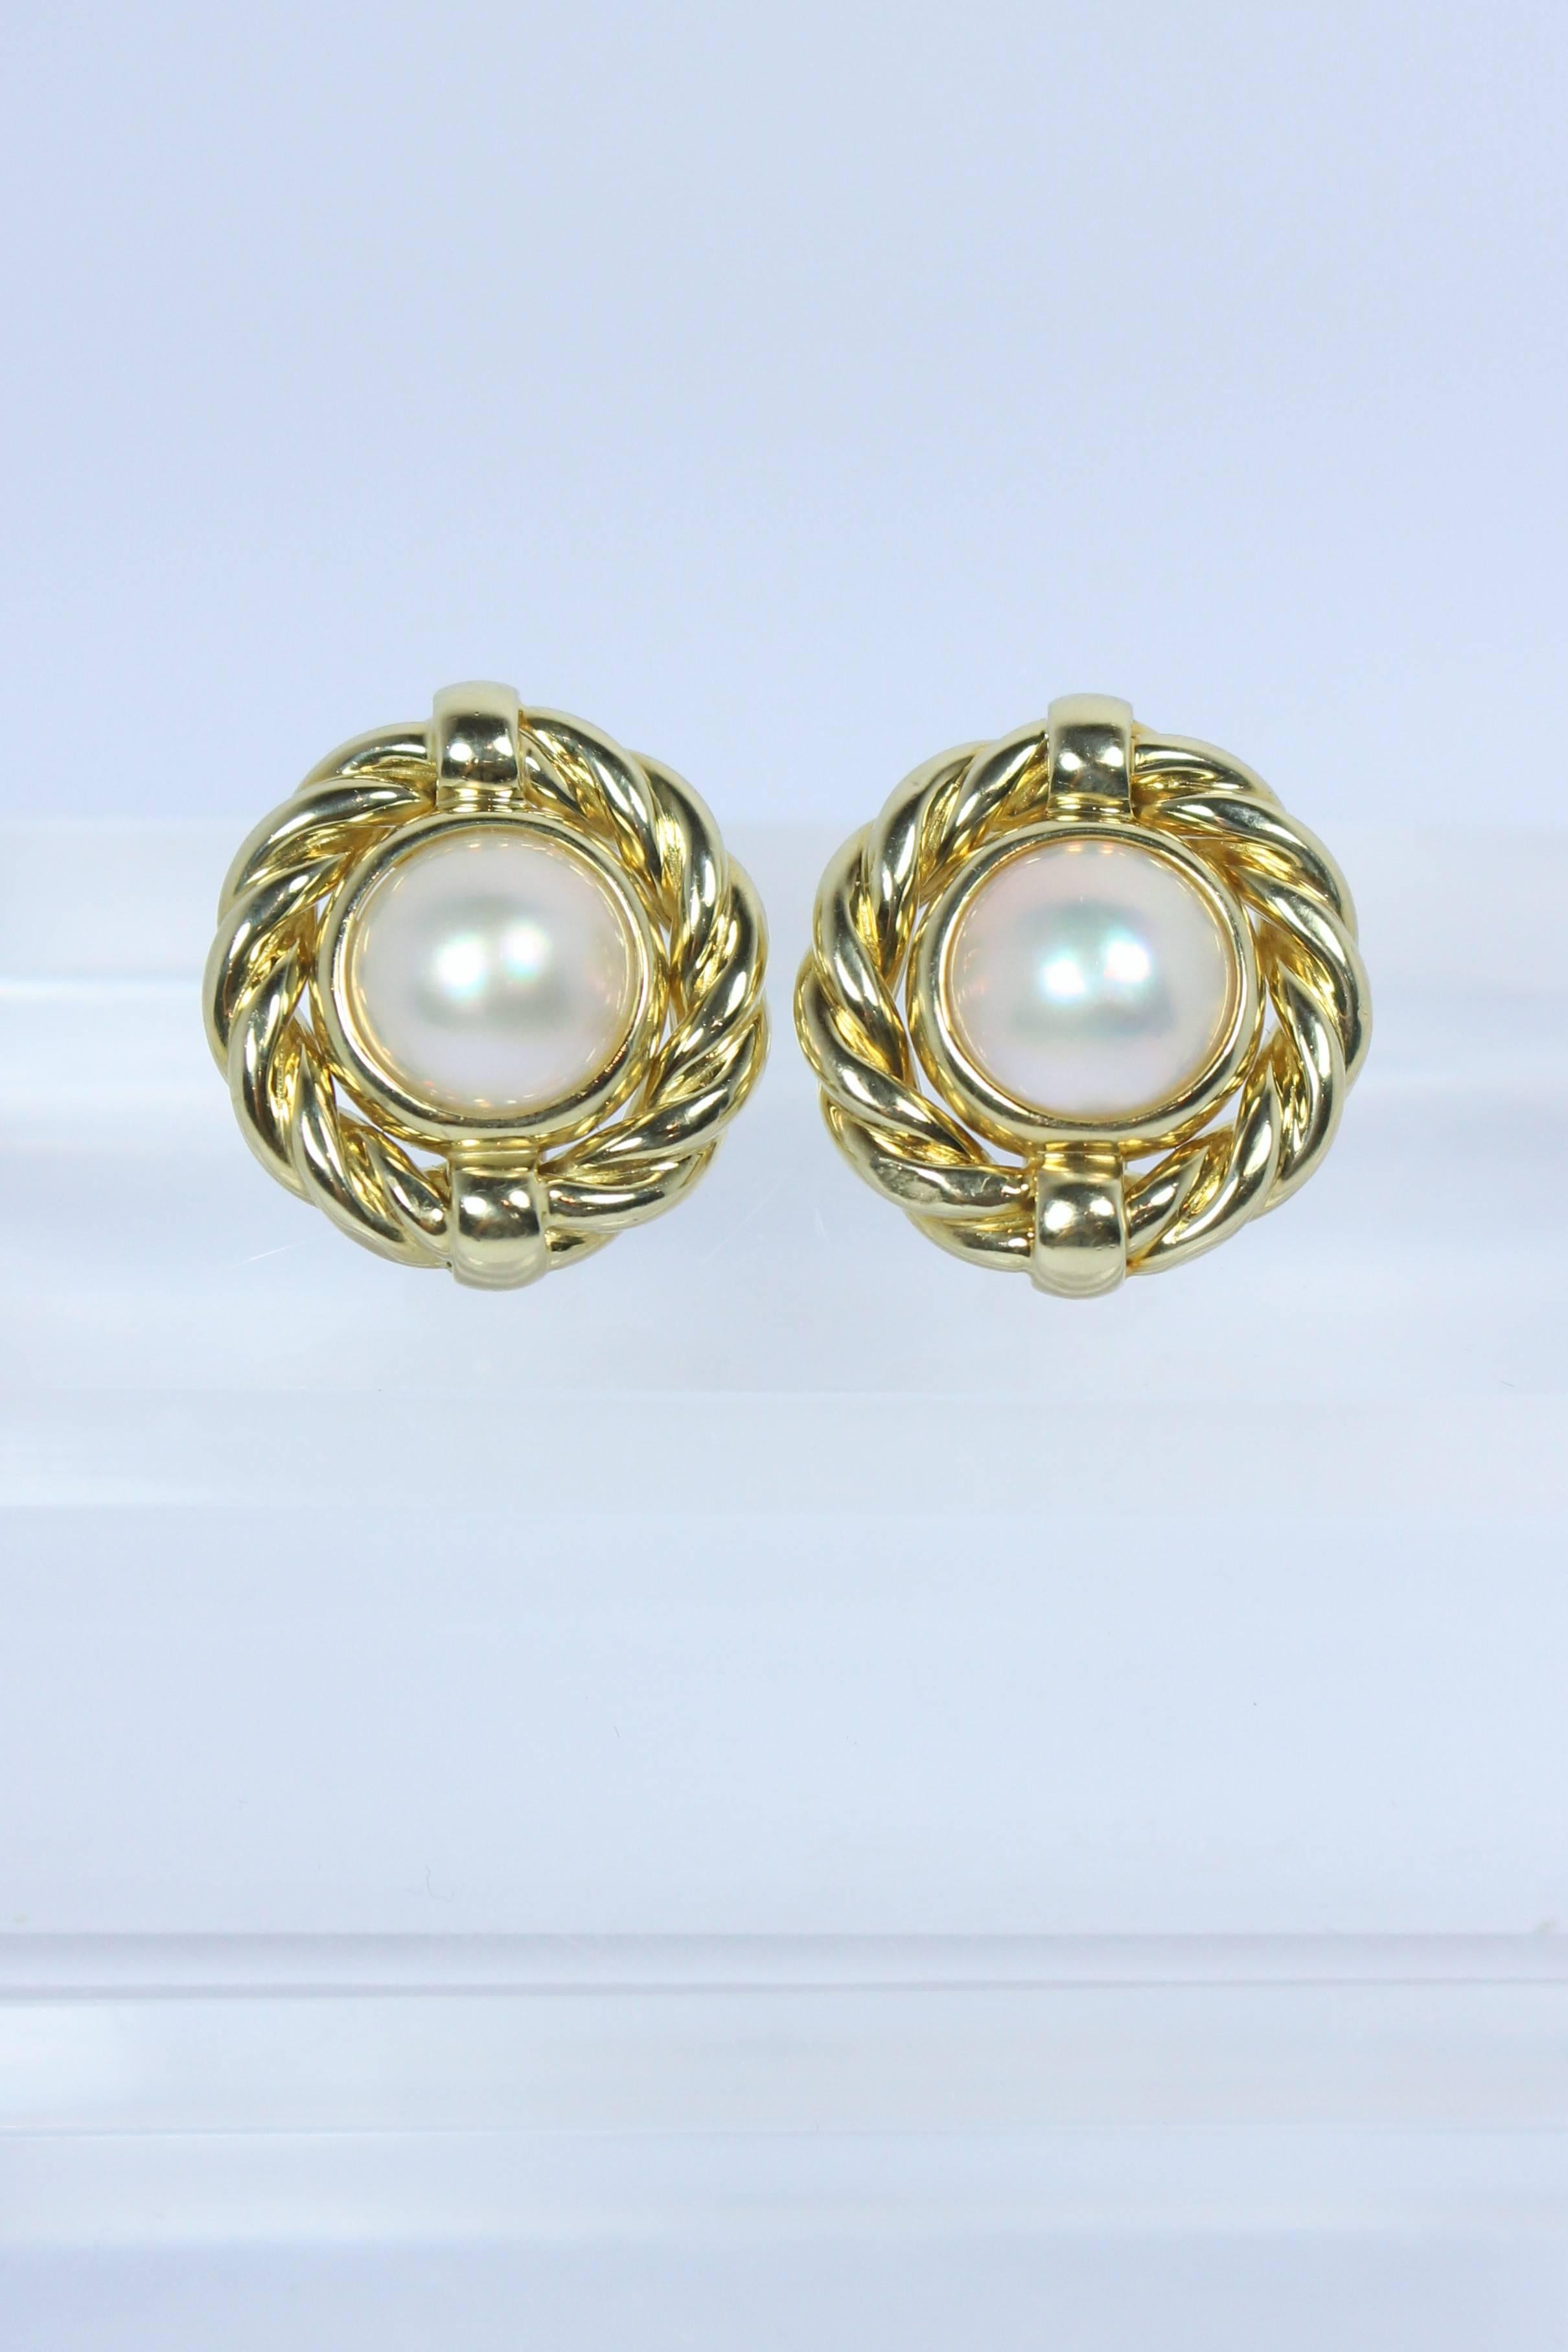 These earrings are composed of 18KT yellow gold with Mabe Pearl. There is a post backing with clip. In excellent vintage condition.

Specs: 
18KT Yellow Gold
Mabe Pearl
  
Length: 7/8